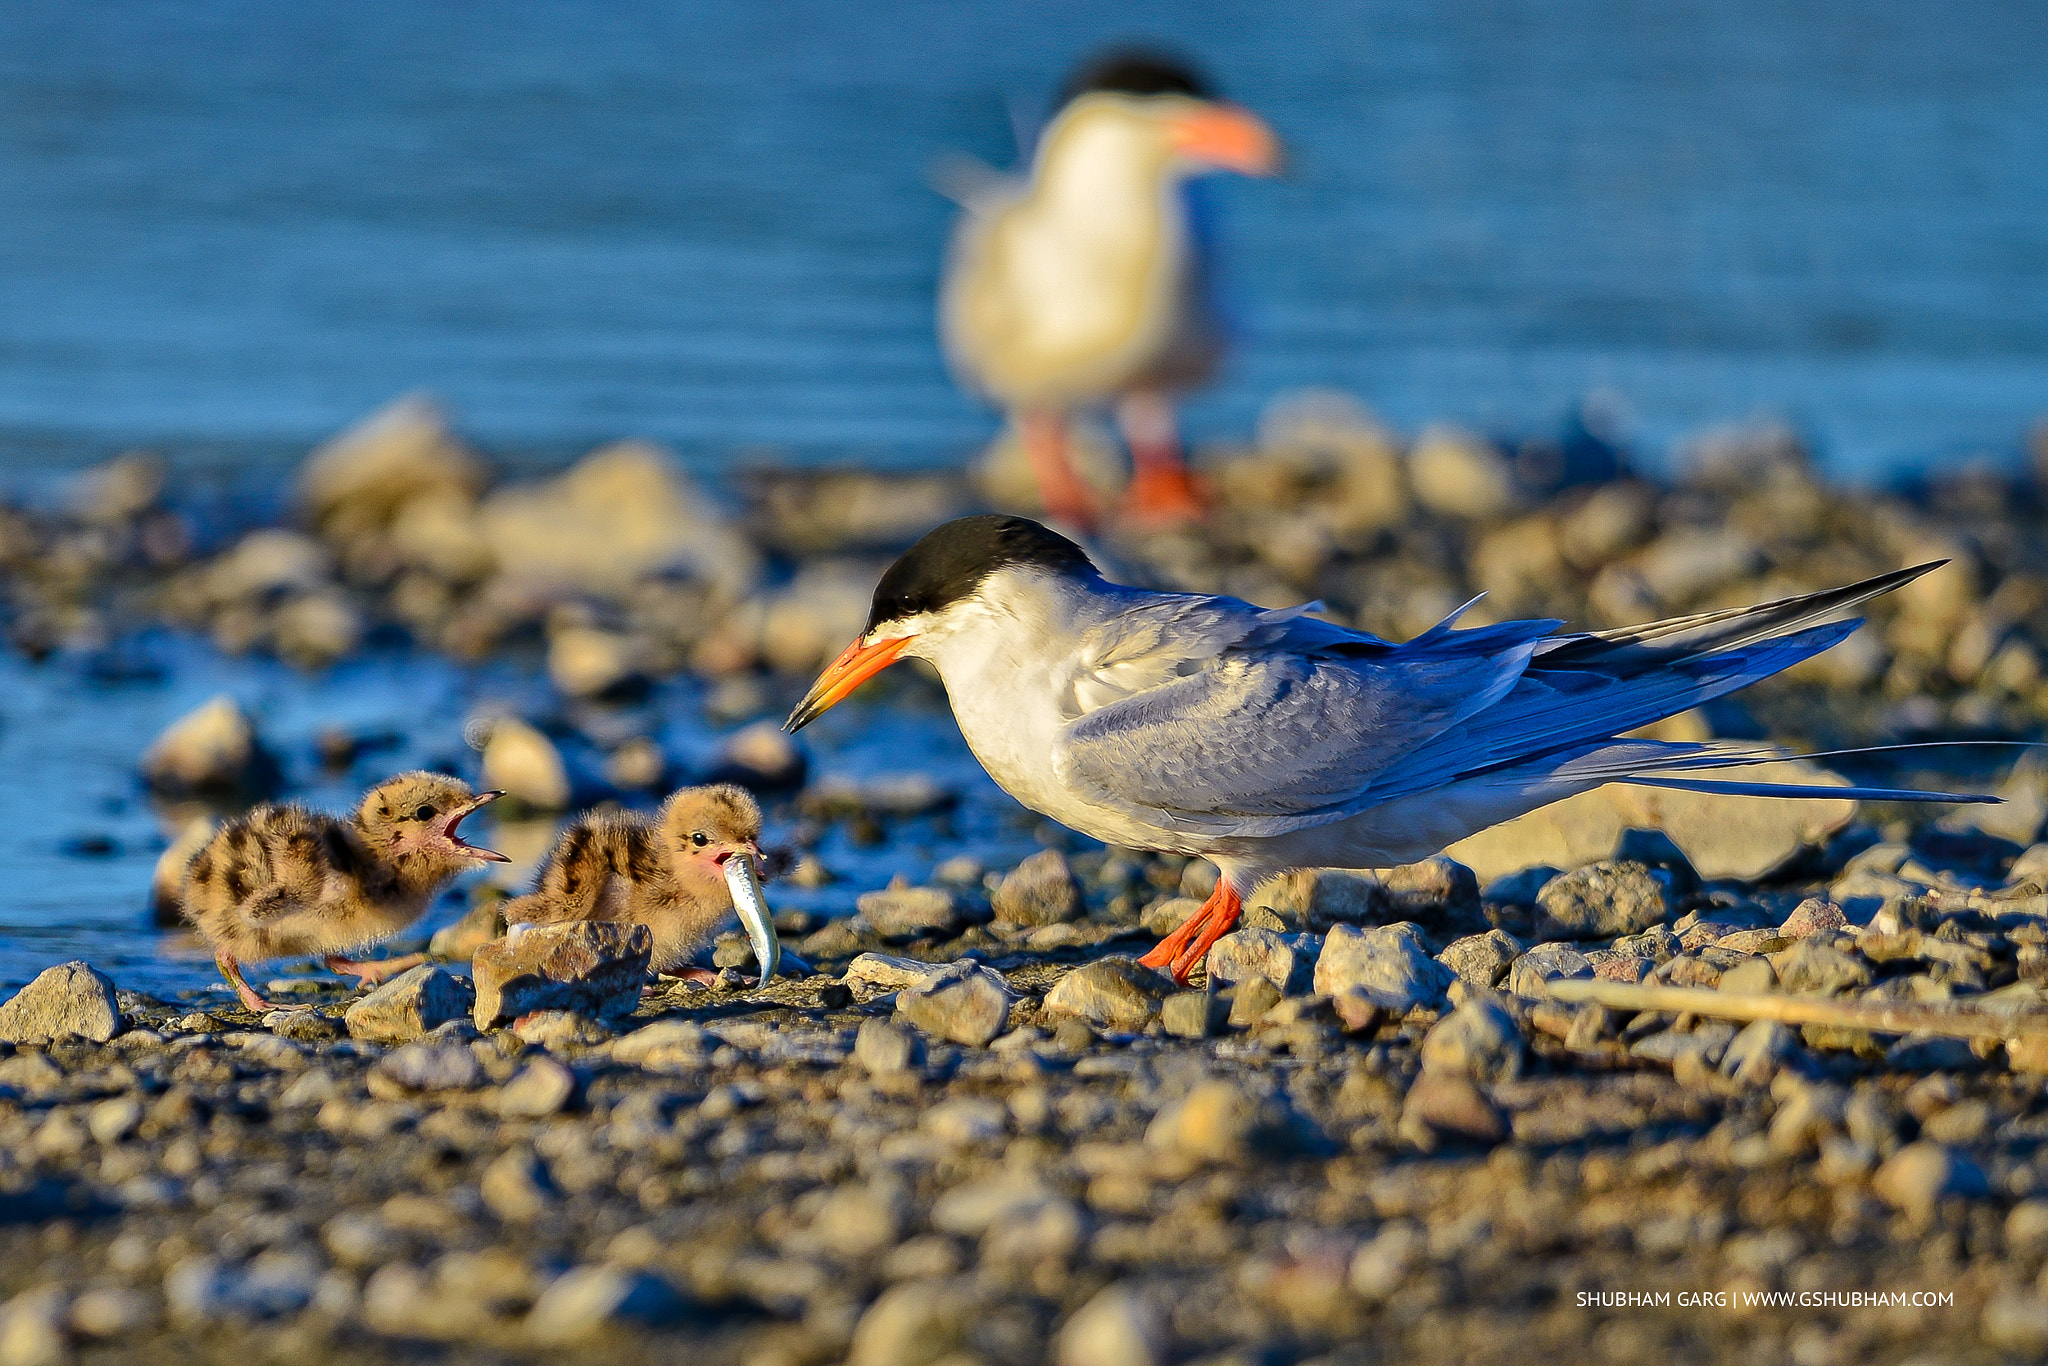 Nikon D800 + Nikon AF-S Nikkor 600mm F4G ED VR sample photo. "feeding youngsters" photography